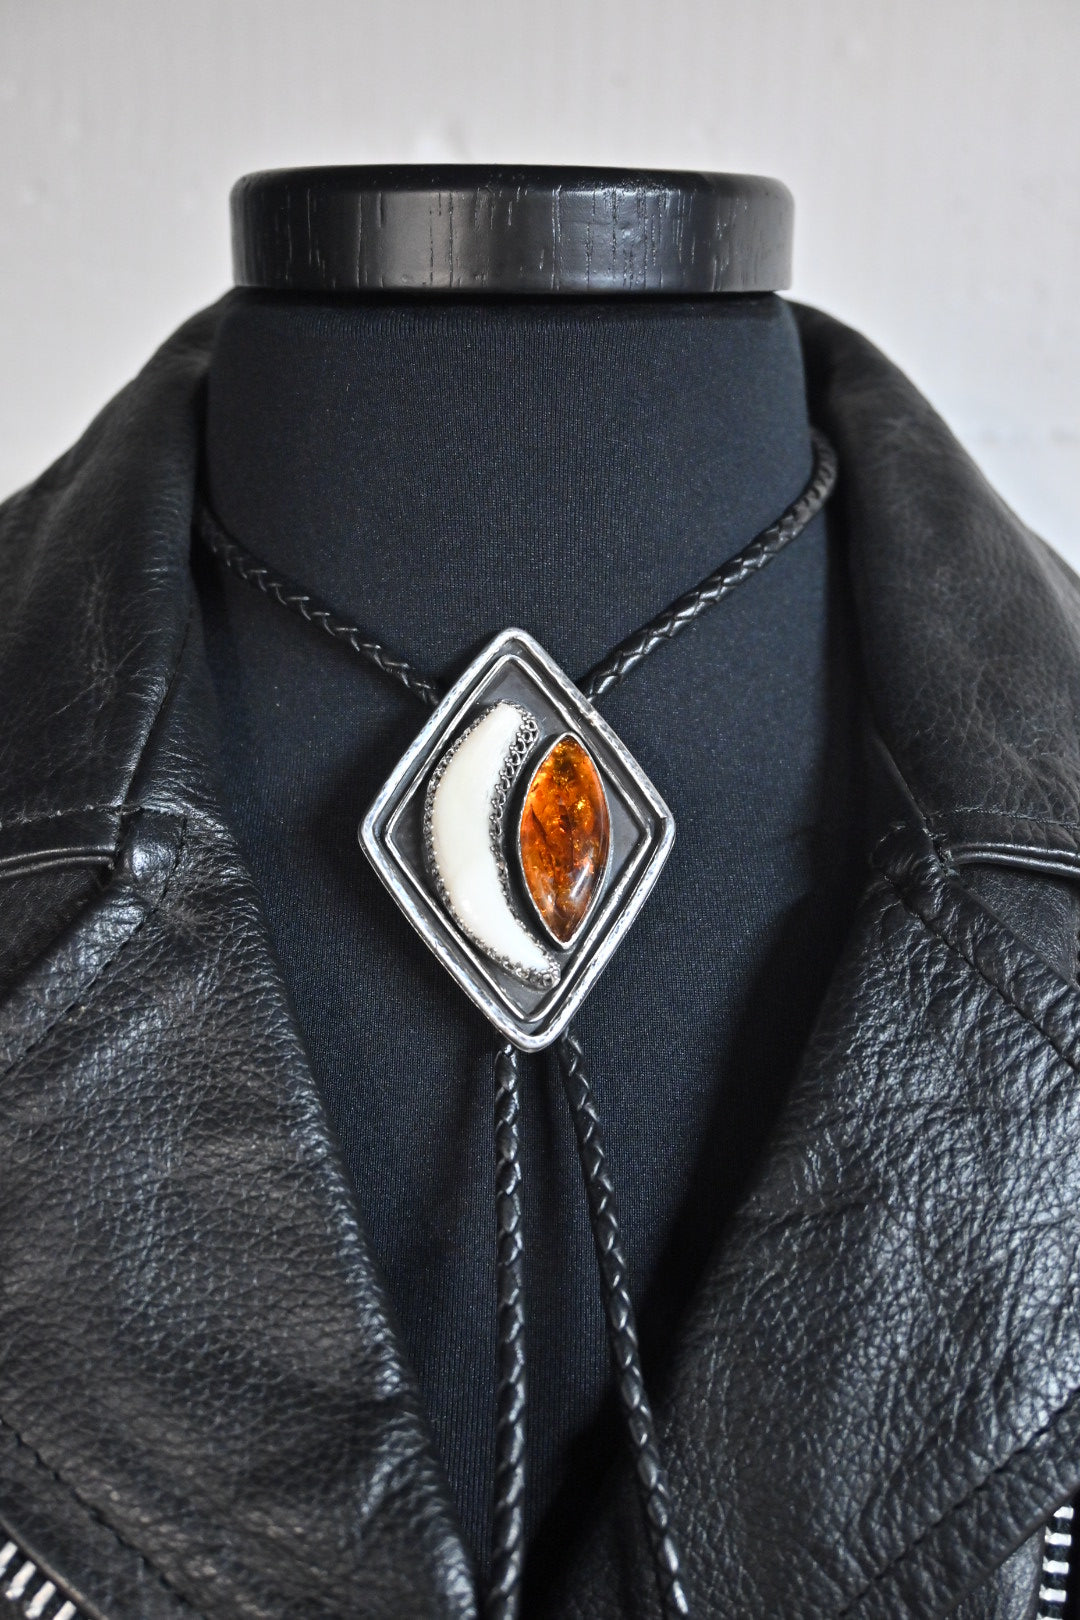 Coyote Canine & Amber Bolo Tie